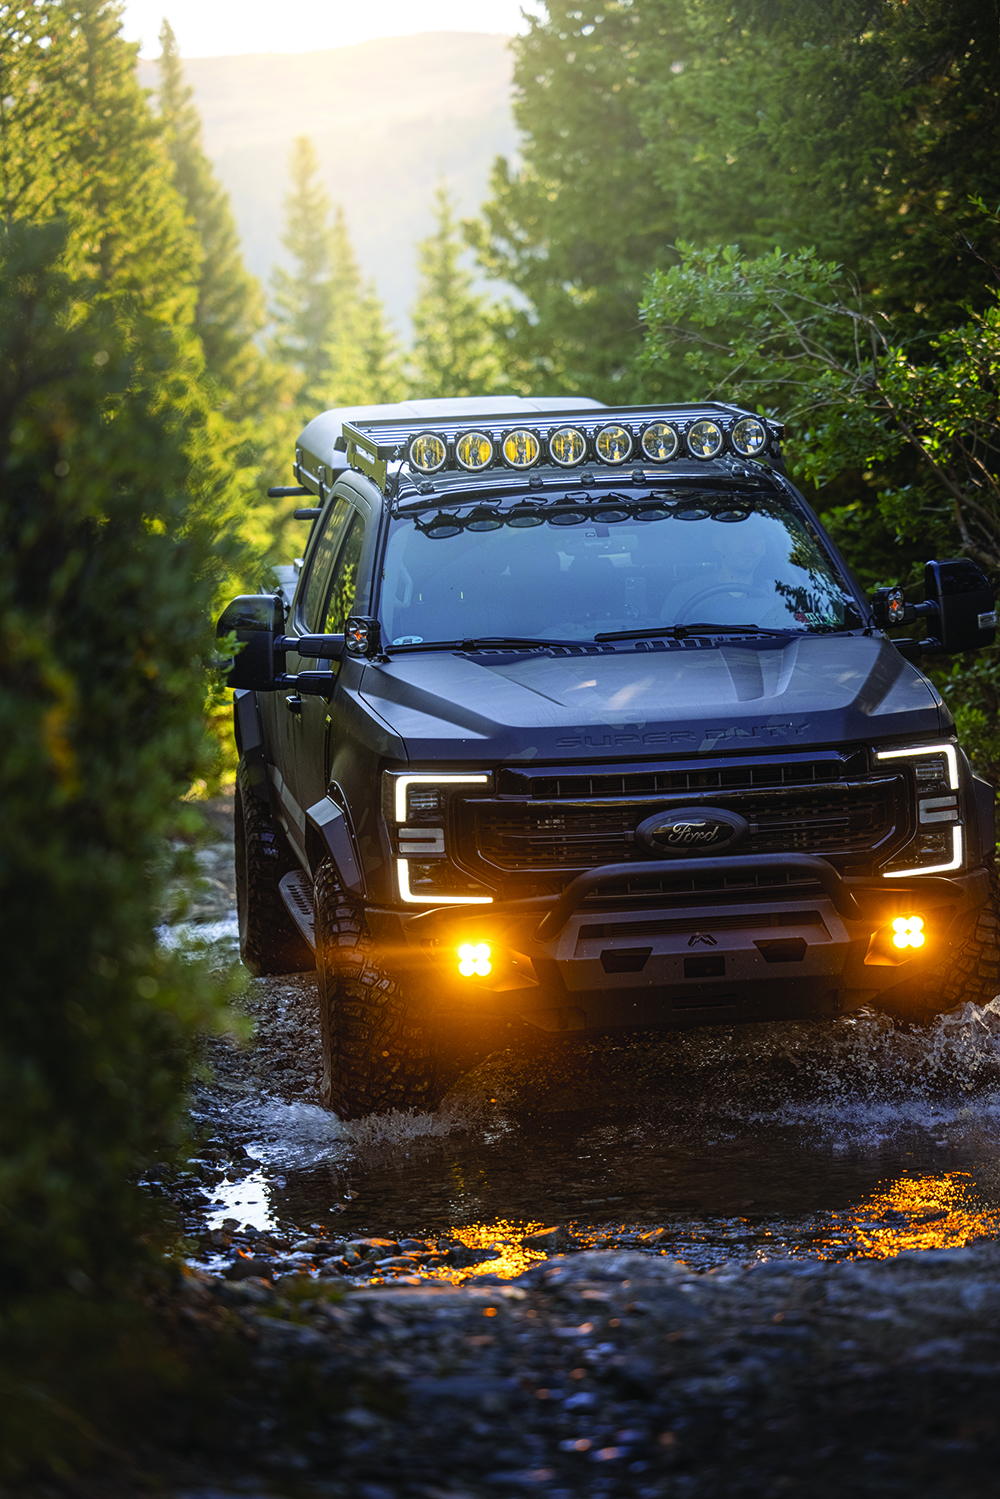 The F250 lights up the trail ahead as the sun sets.